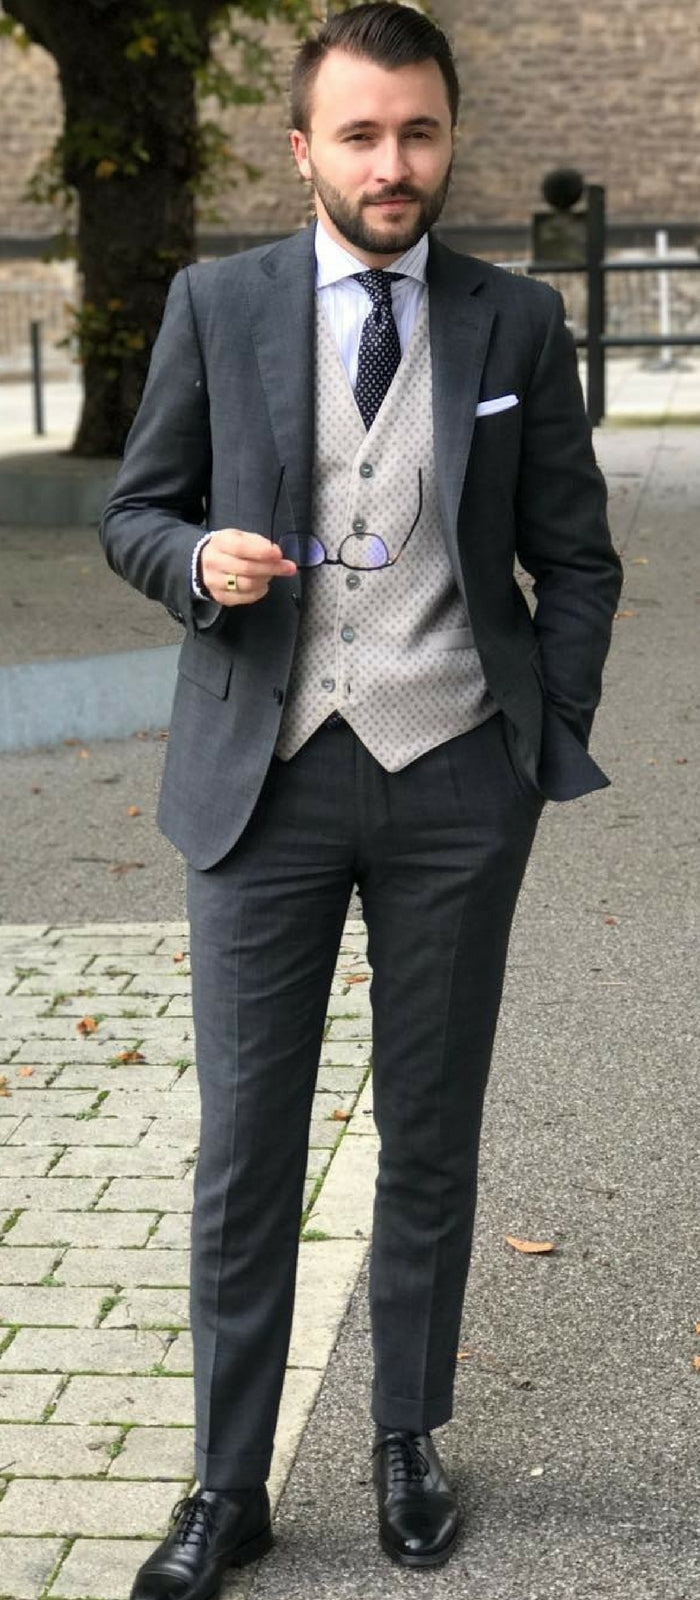 Formal outfit ideas for men